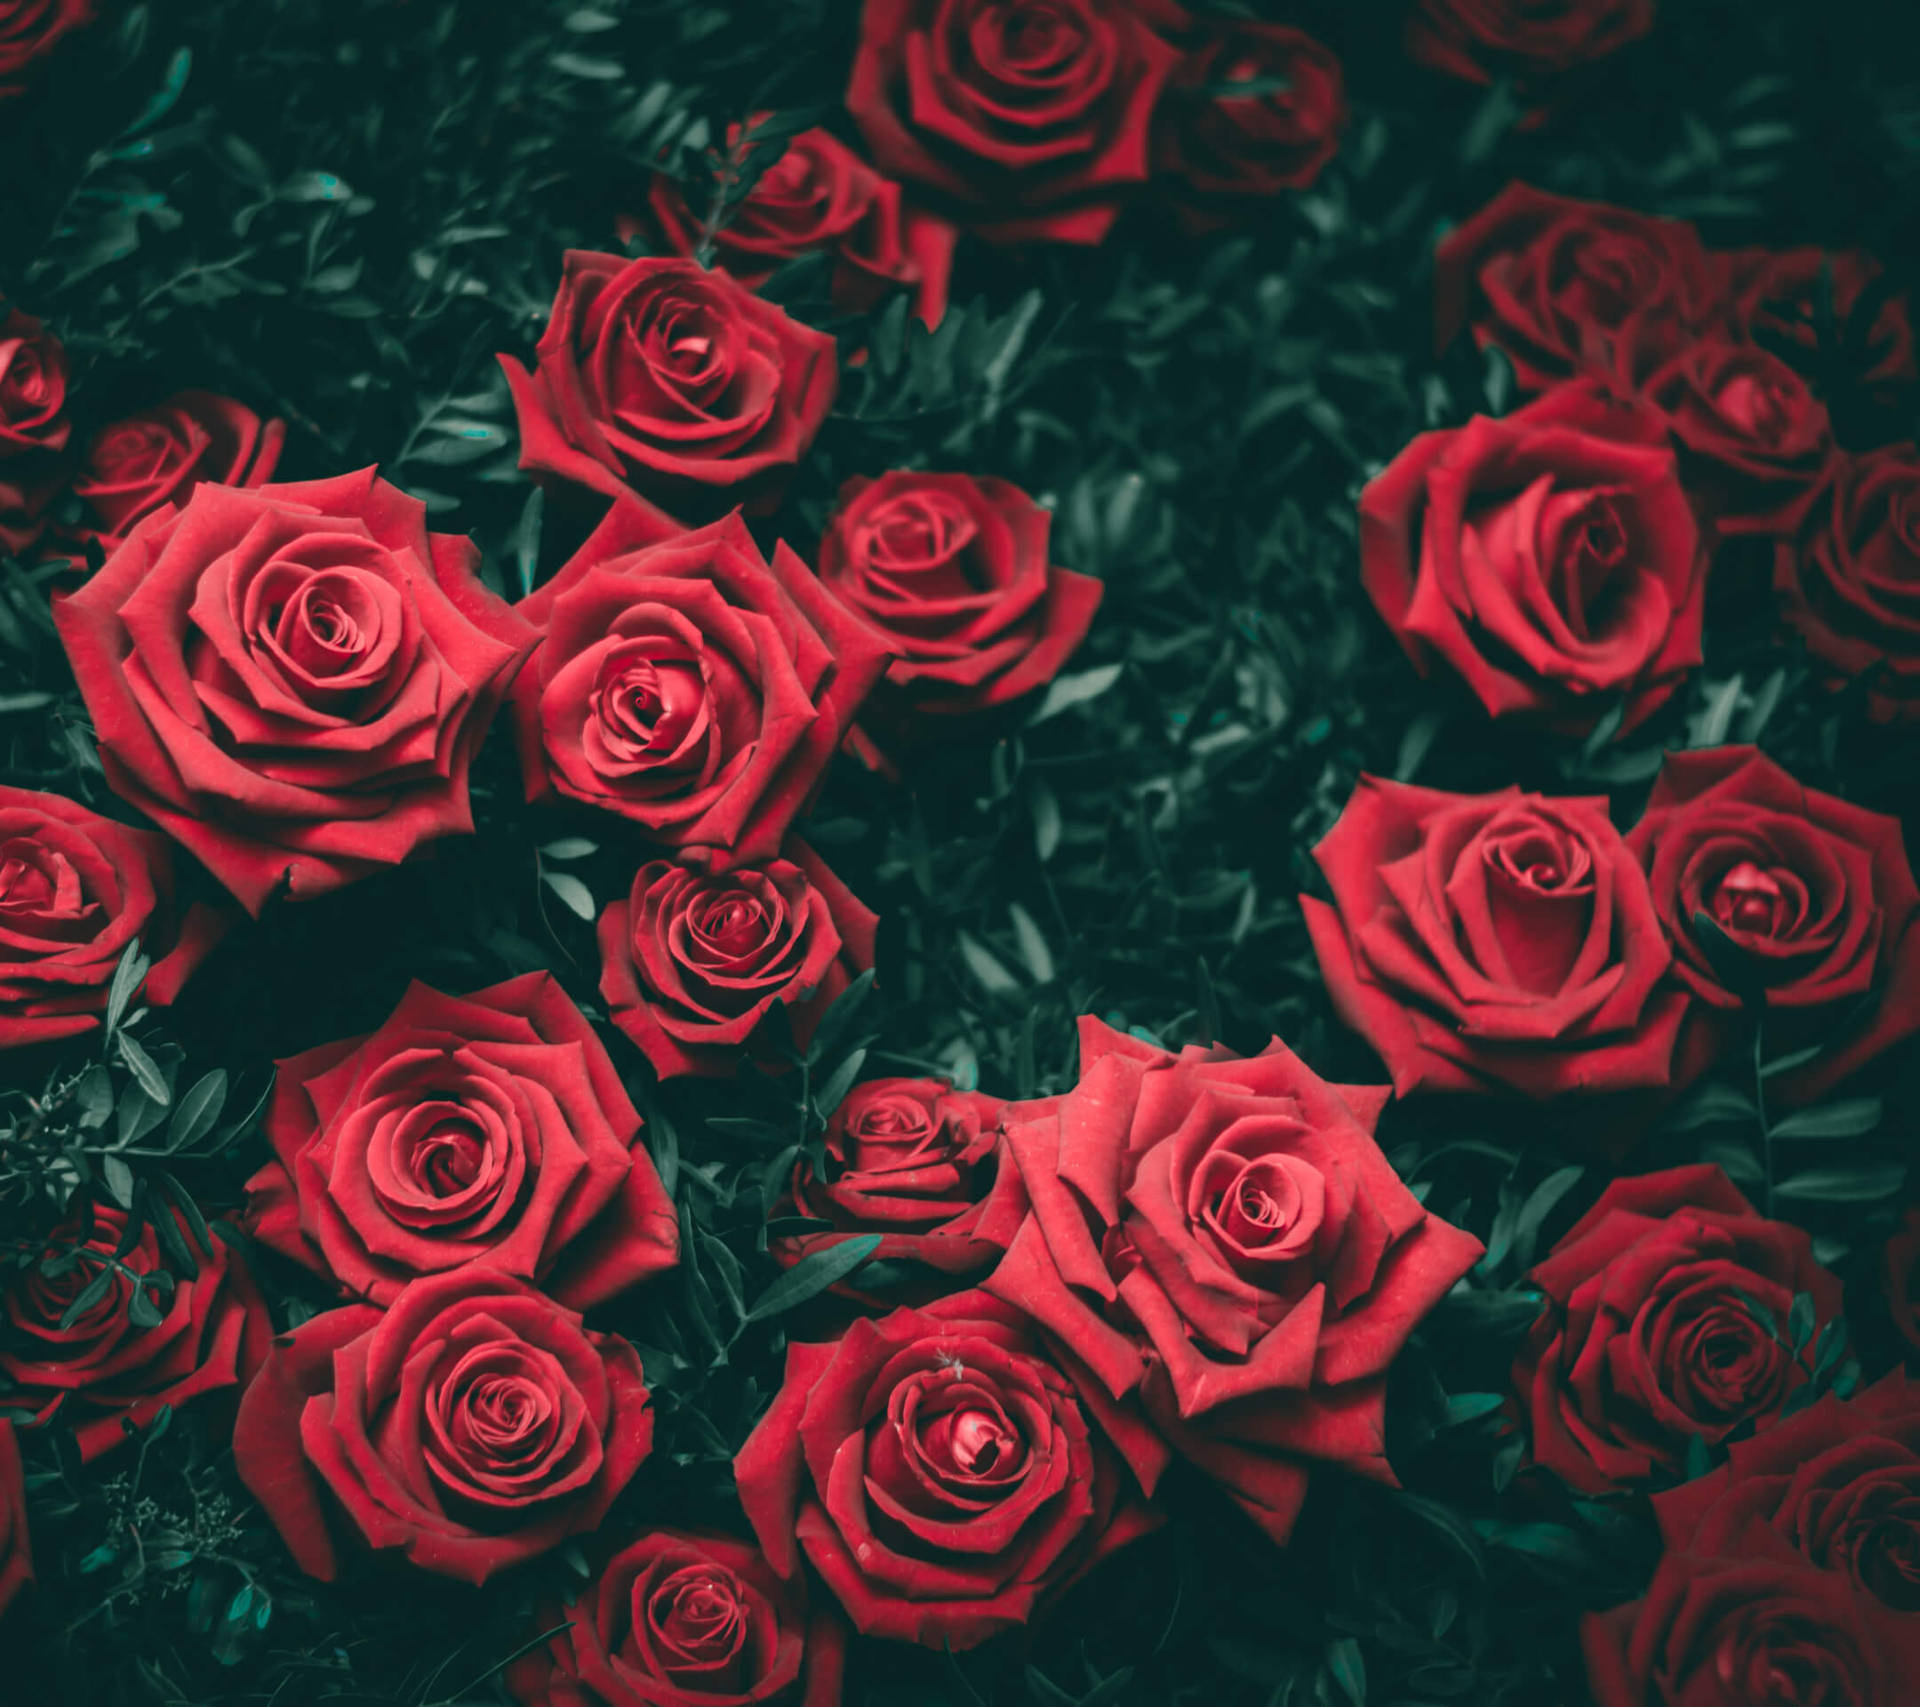 Bunch Of Red Roses Image